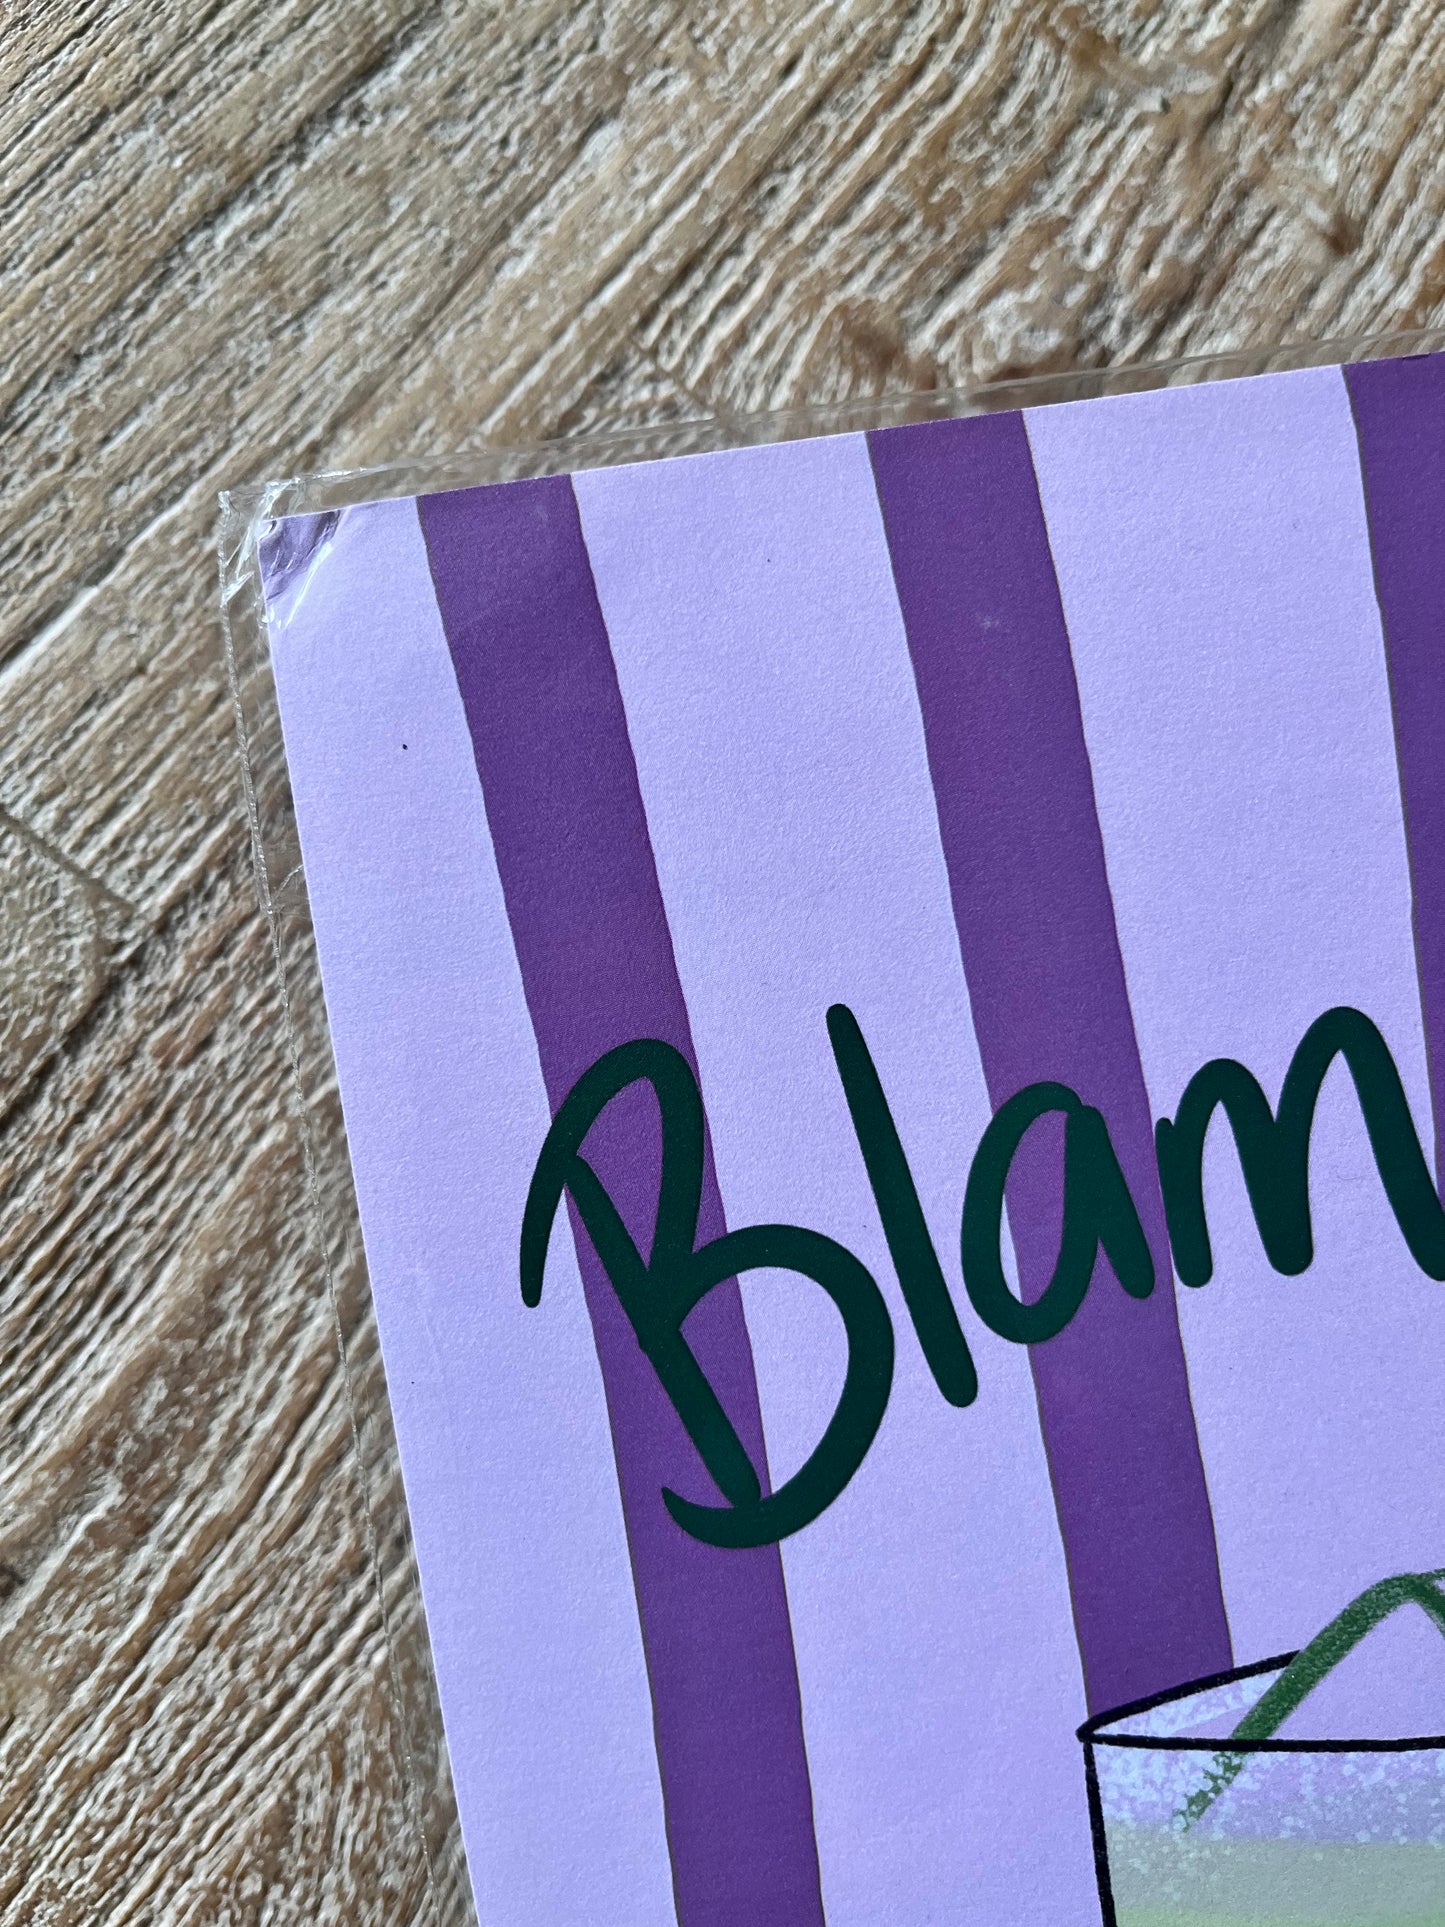 SAMPLE - A4 Blame it on the Margs Print